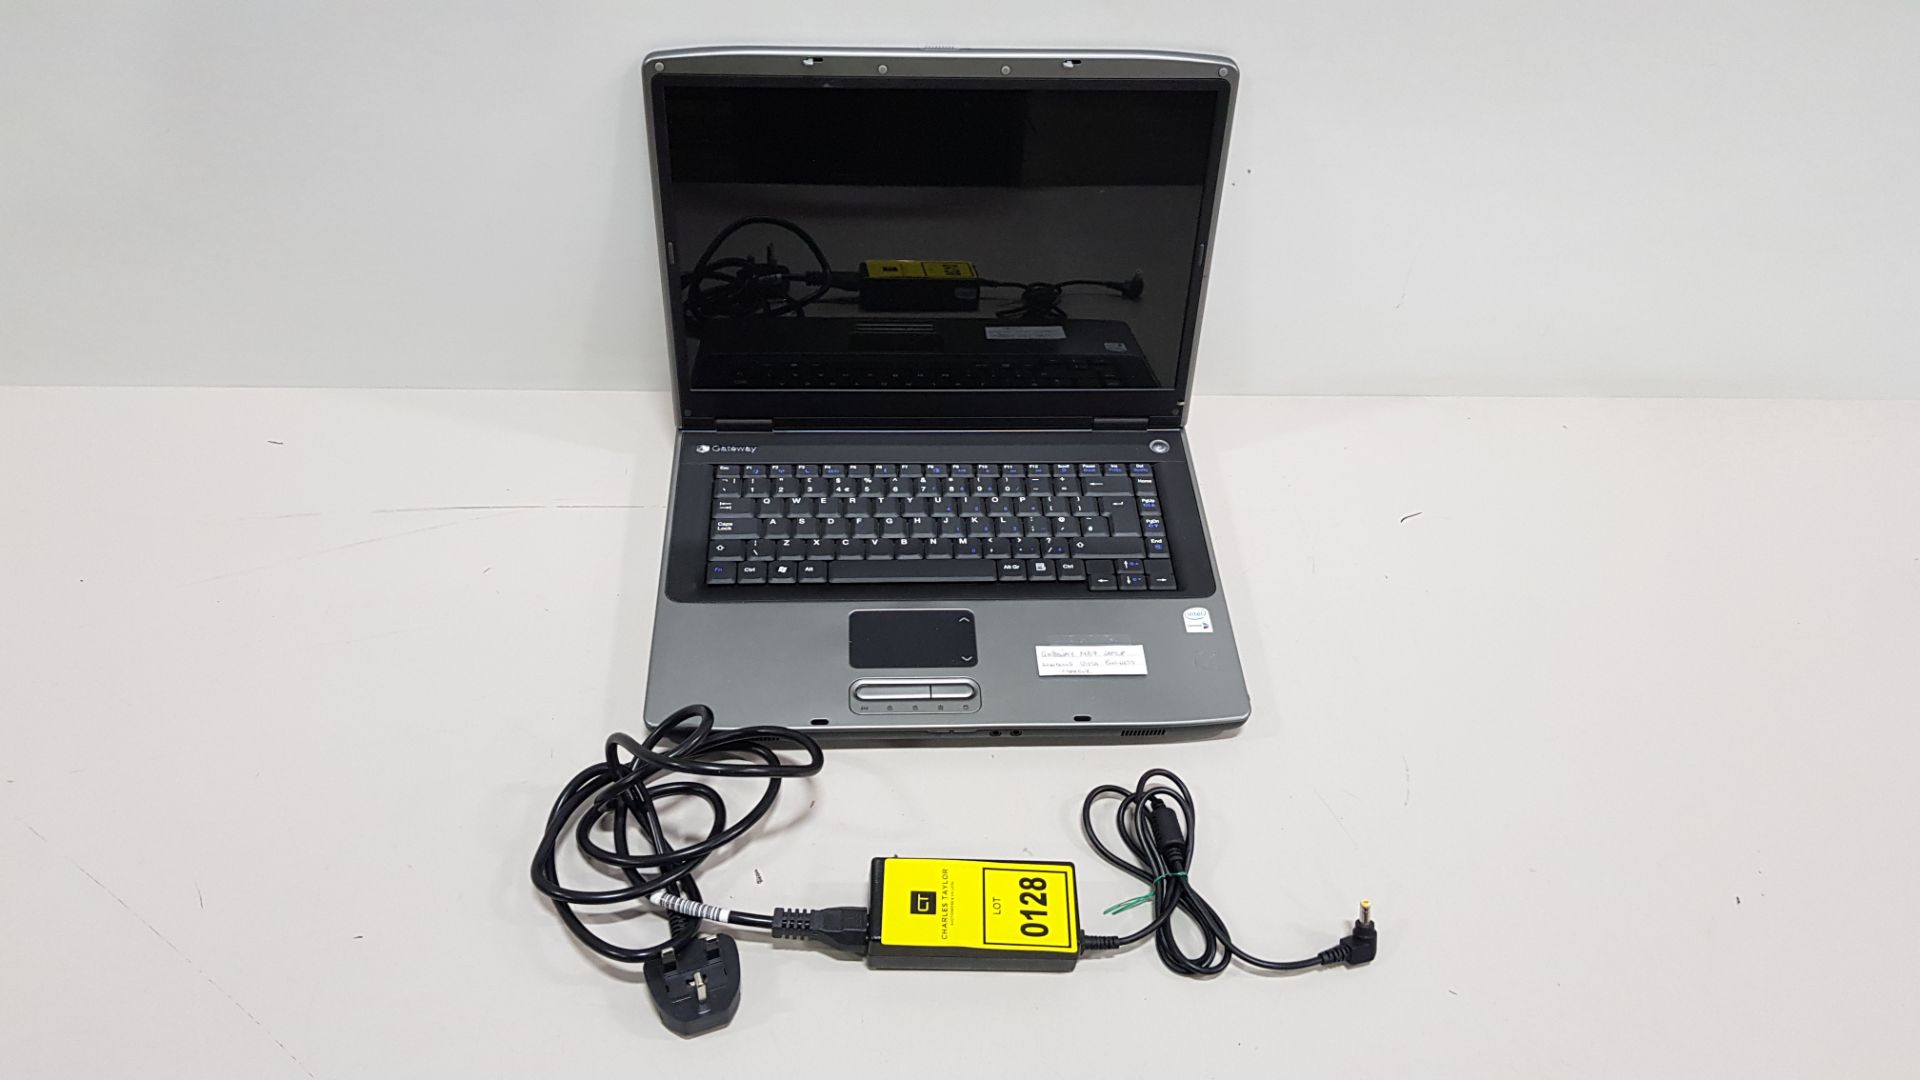 GATEWAY MA7 LAPTOP WINDOWS VISTA BUSINESS - WITH CHARGER